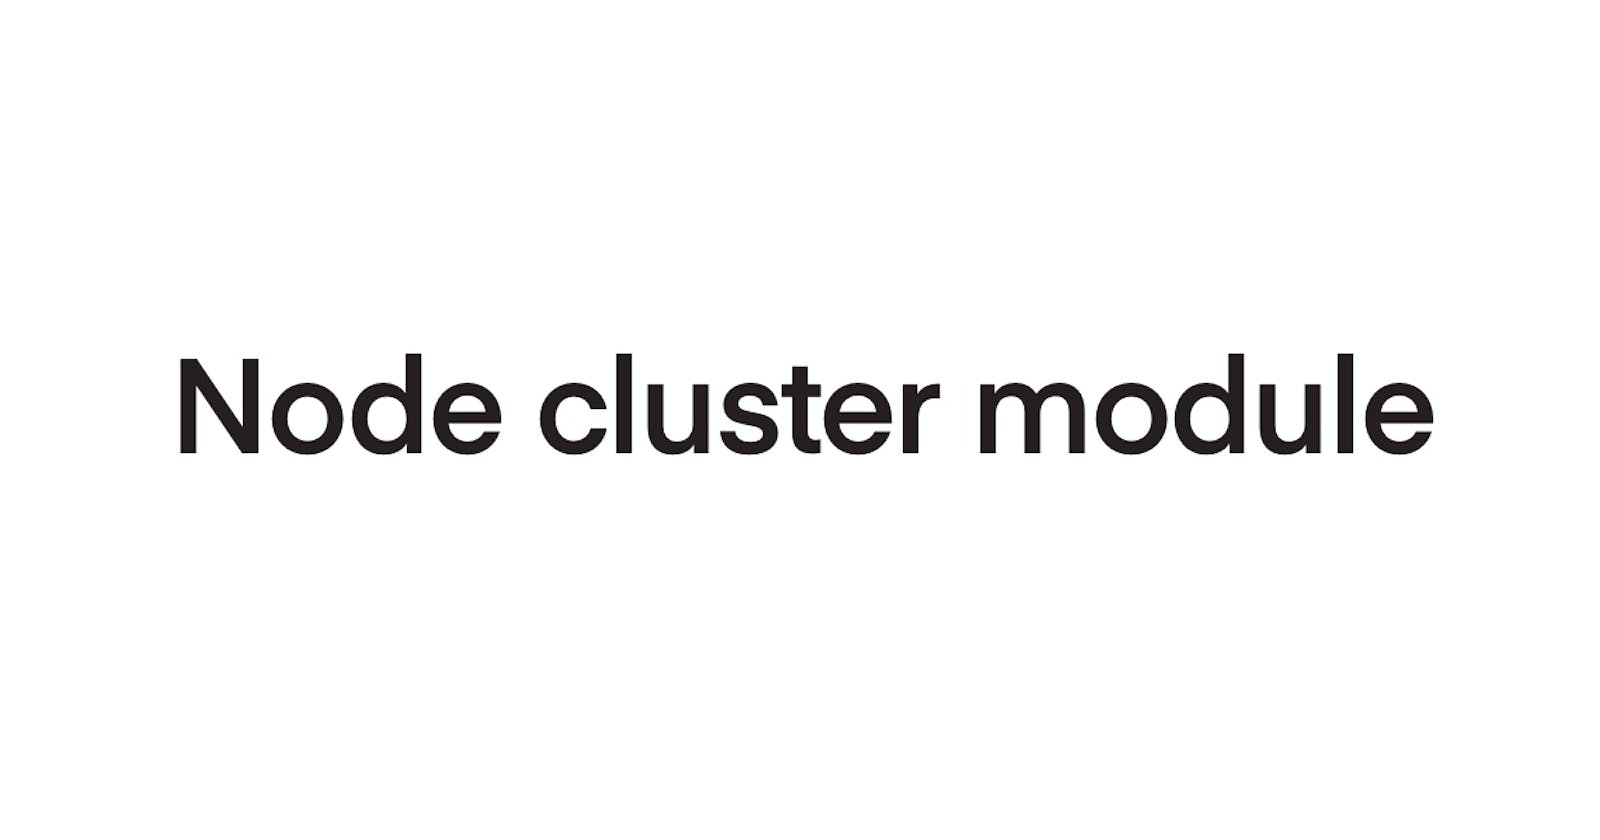 Node.js cluster module. You probably don't need it